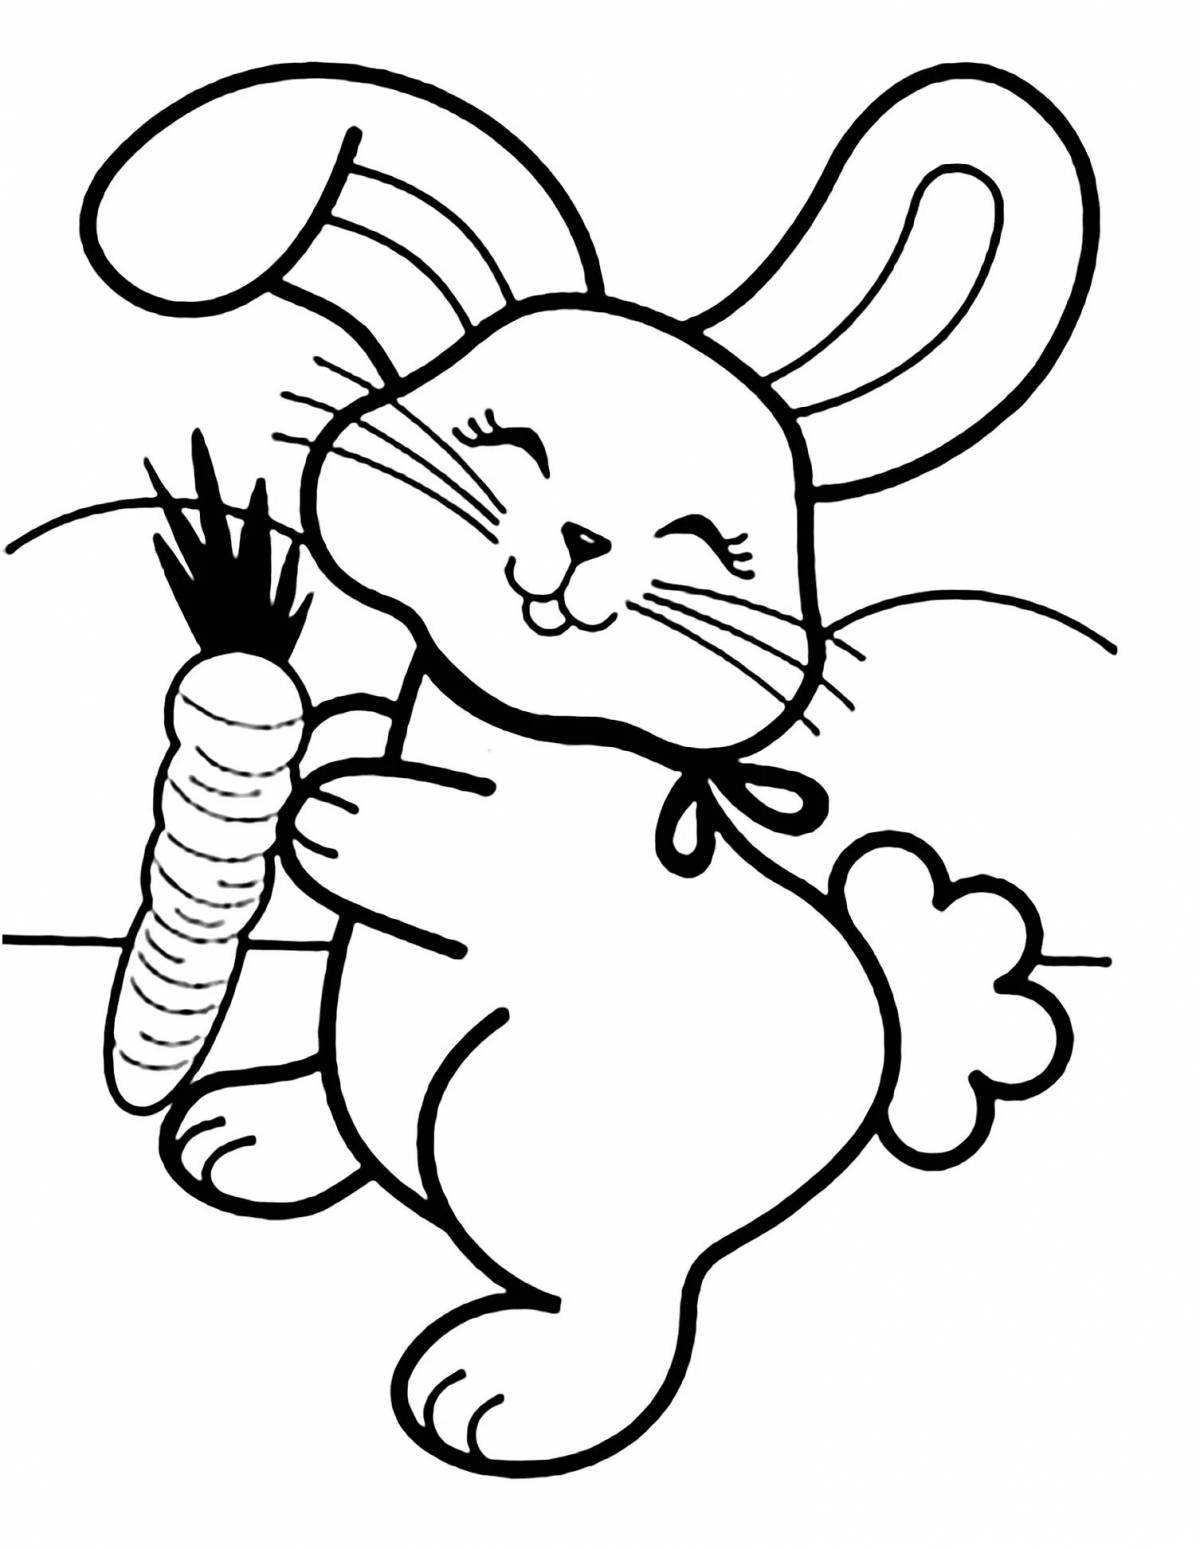 Witty bunny coloring book